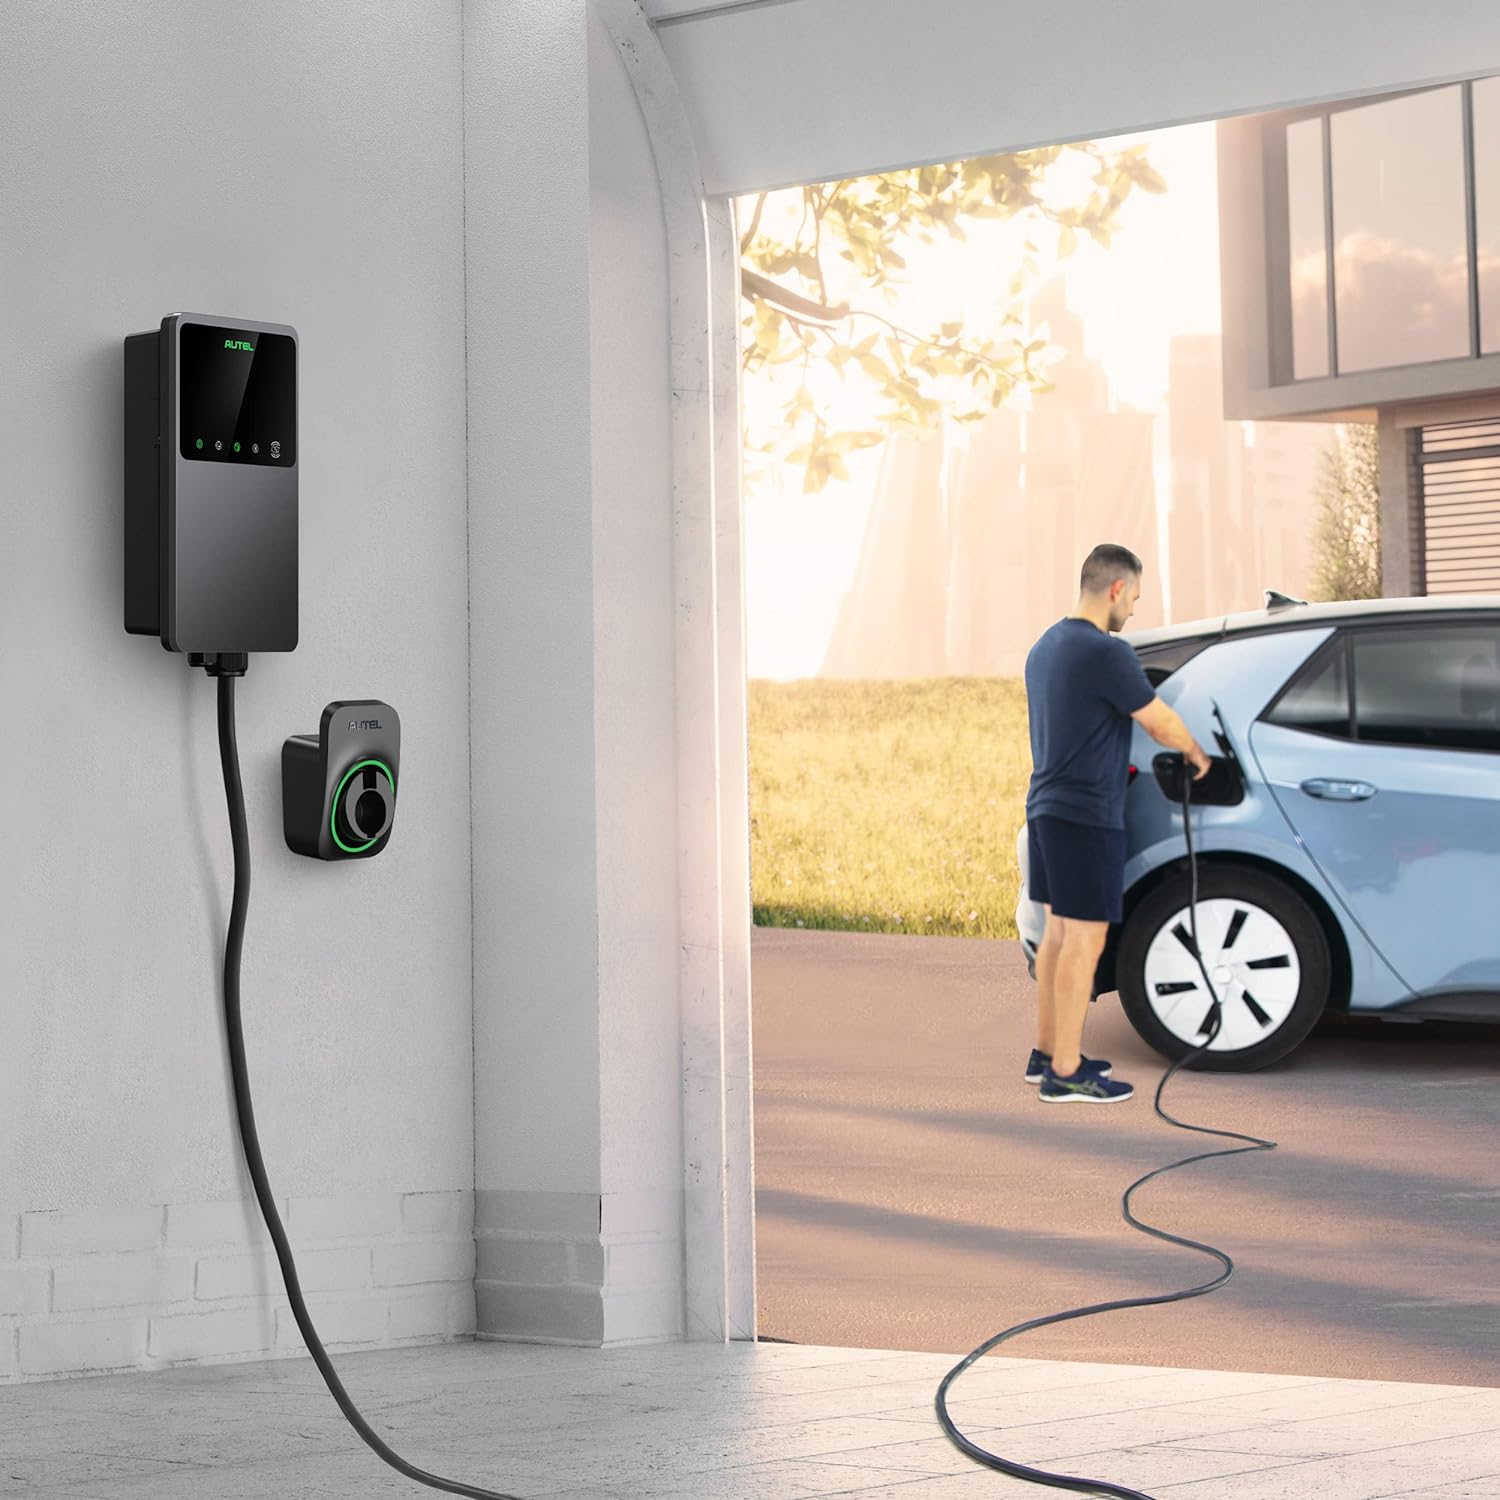 Wallbox for electric cars: what to know - Daze